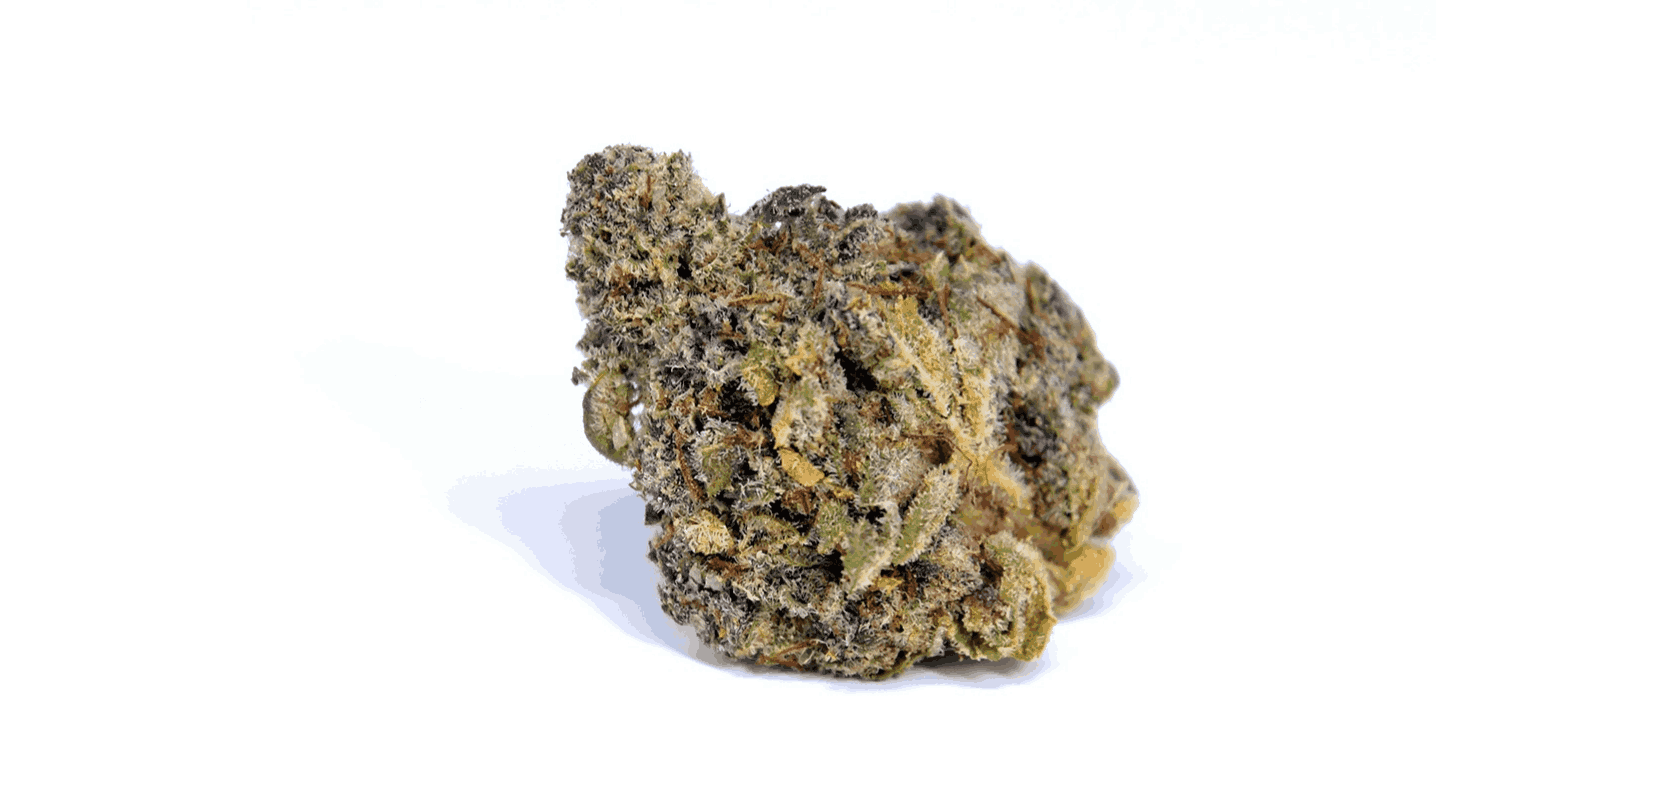 If all of this sounds good, keep scrolling for the internet's best Pink God strain review.